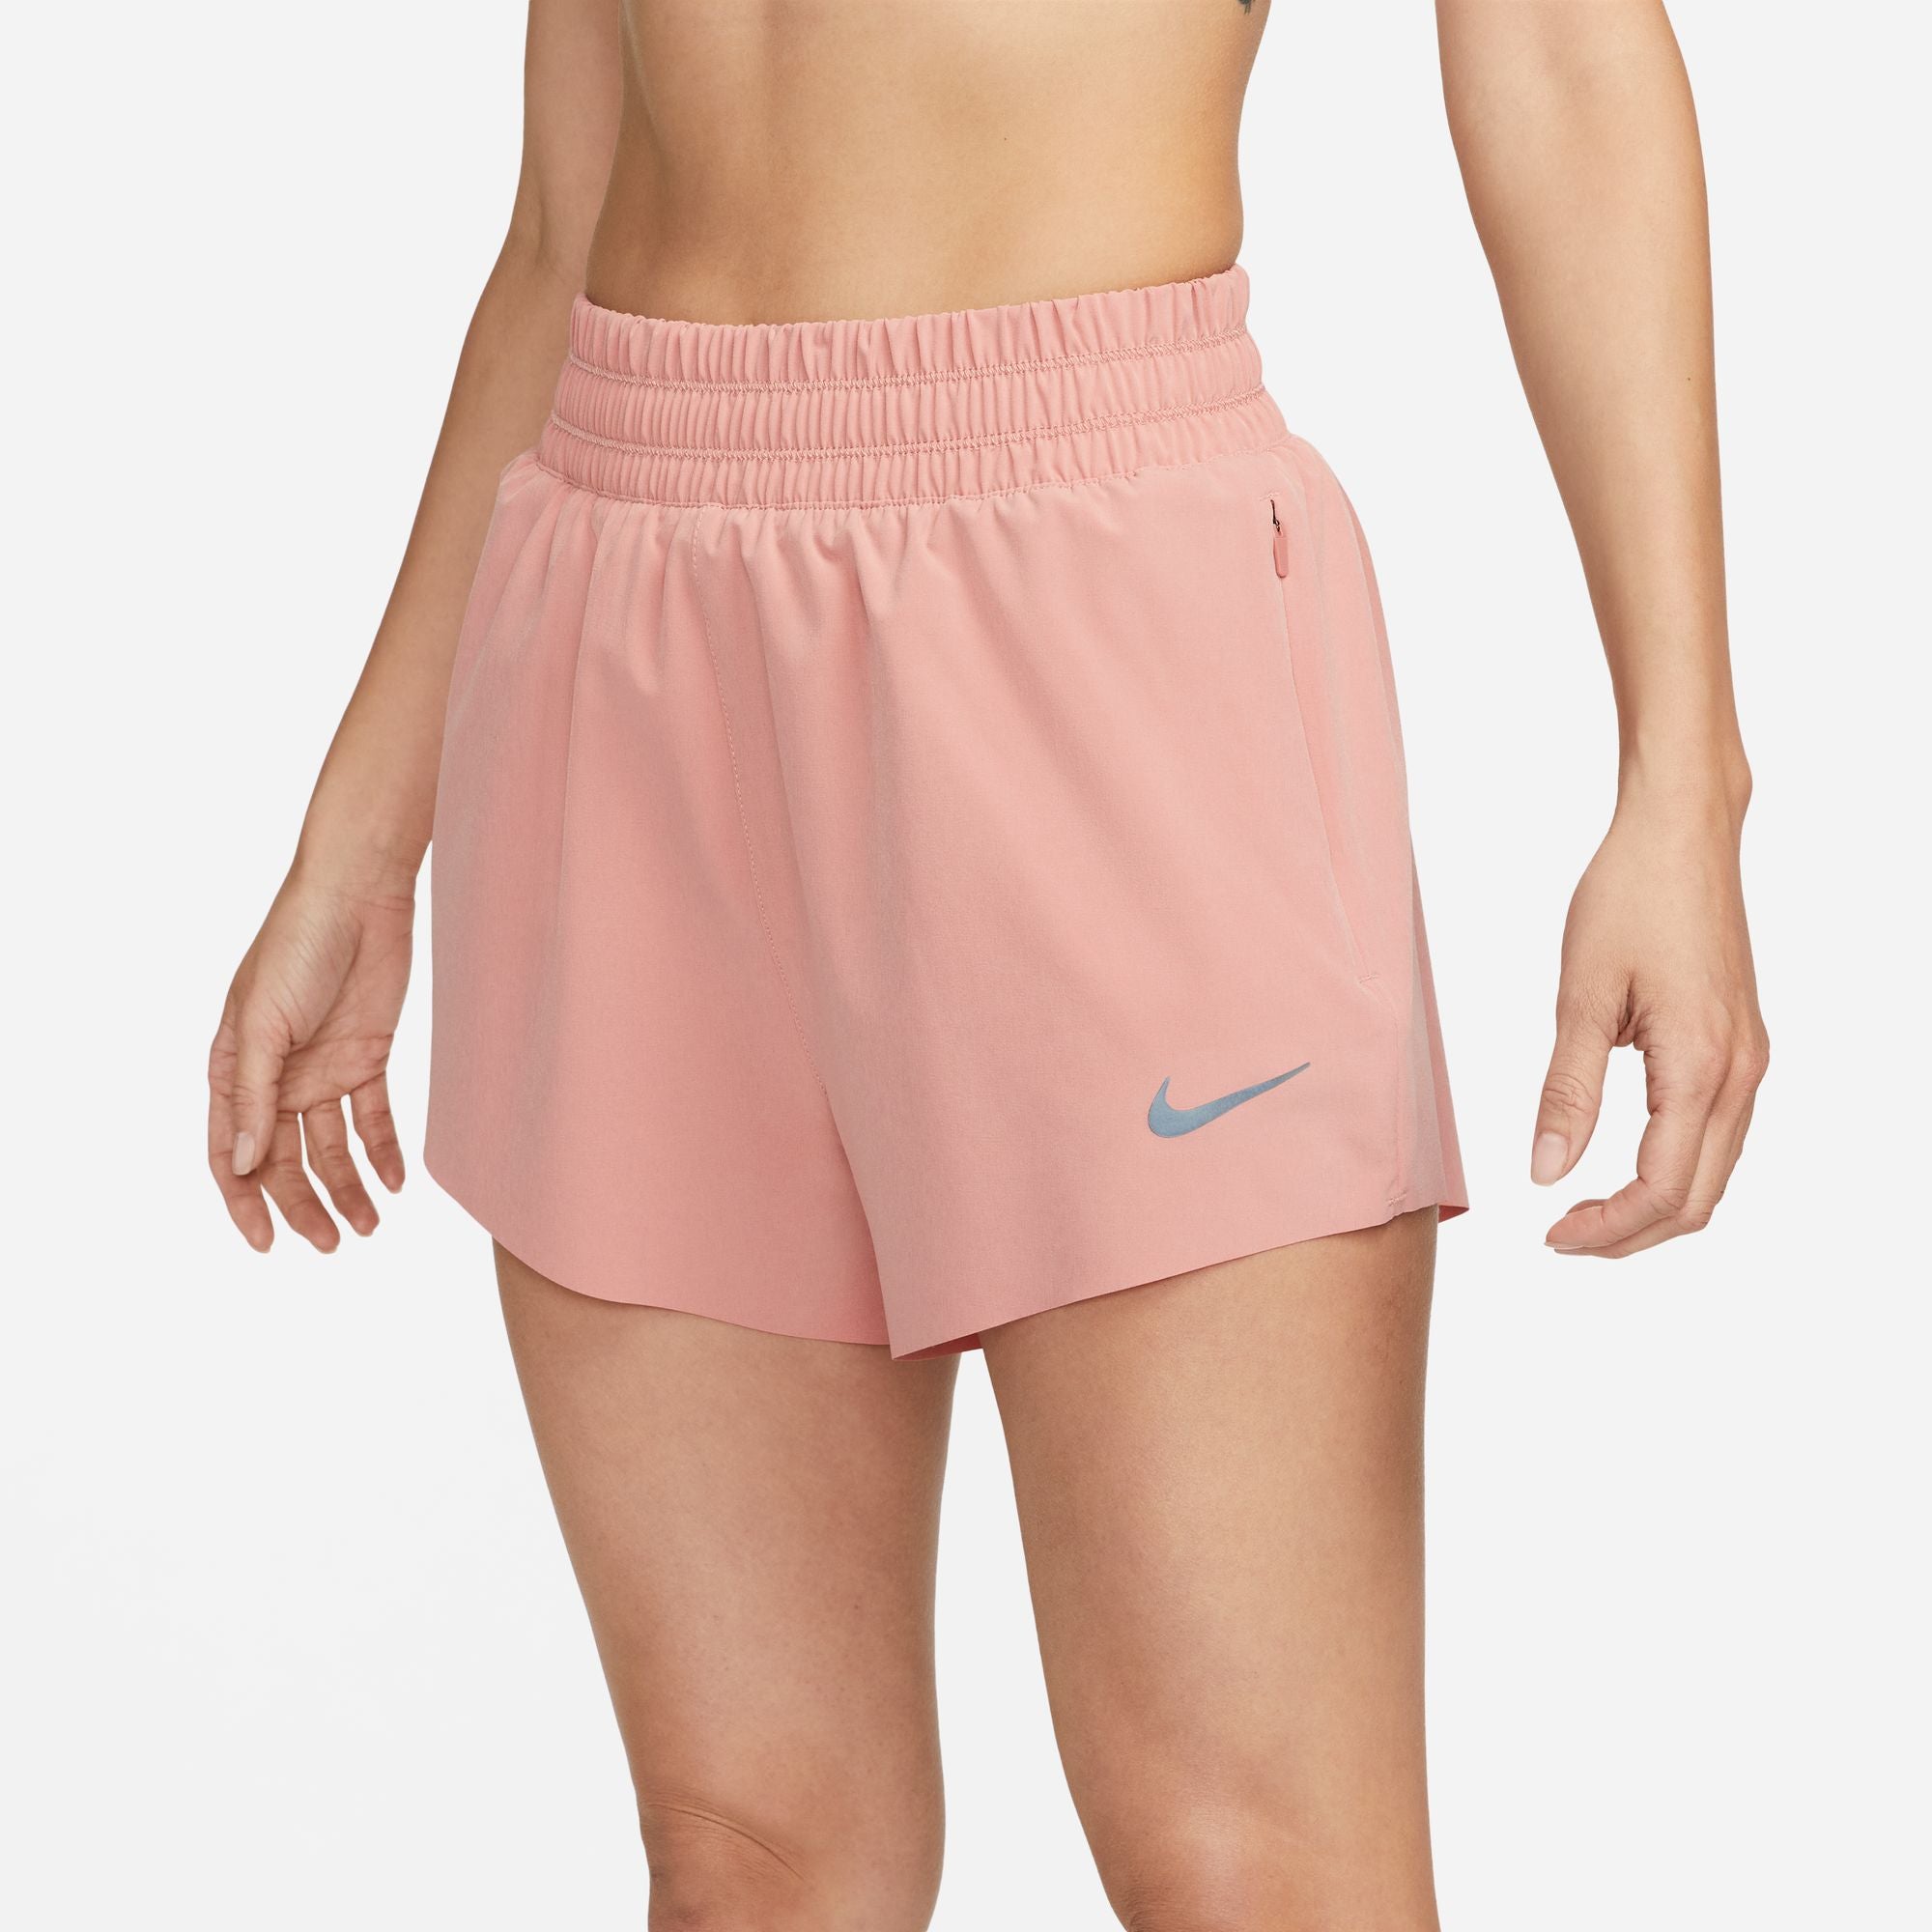 NIKE DRI-FIT RUNNING DIVISION WOMEN'S HIGH-WAISTED 3" BRIEF-LINED RUNNING SHORTS WITH POCKETS